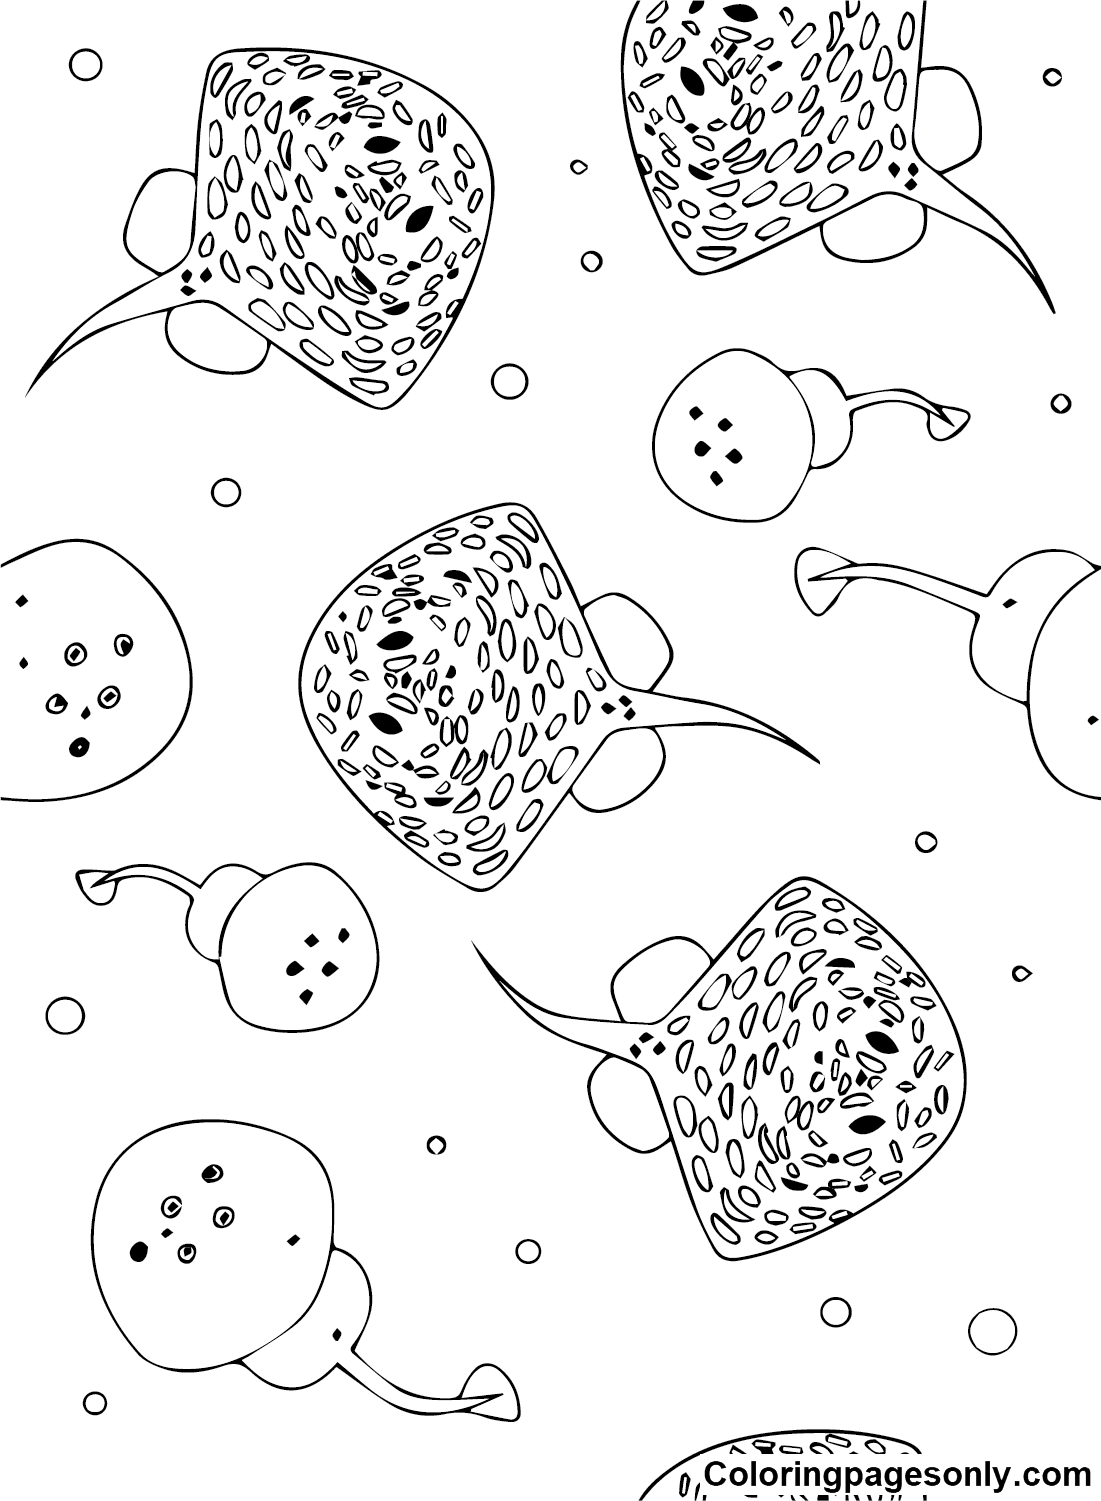 Stingray to print Coloring Page